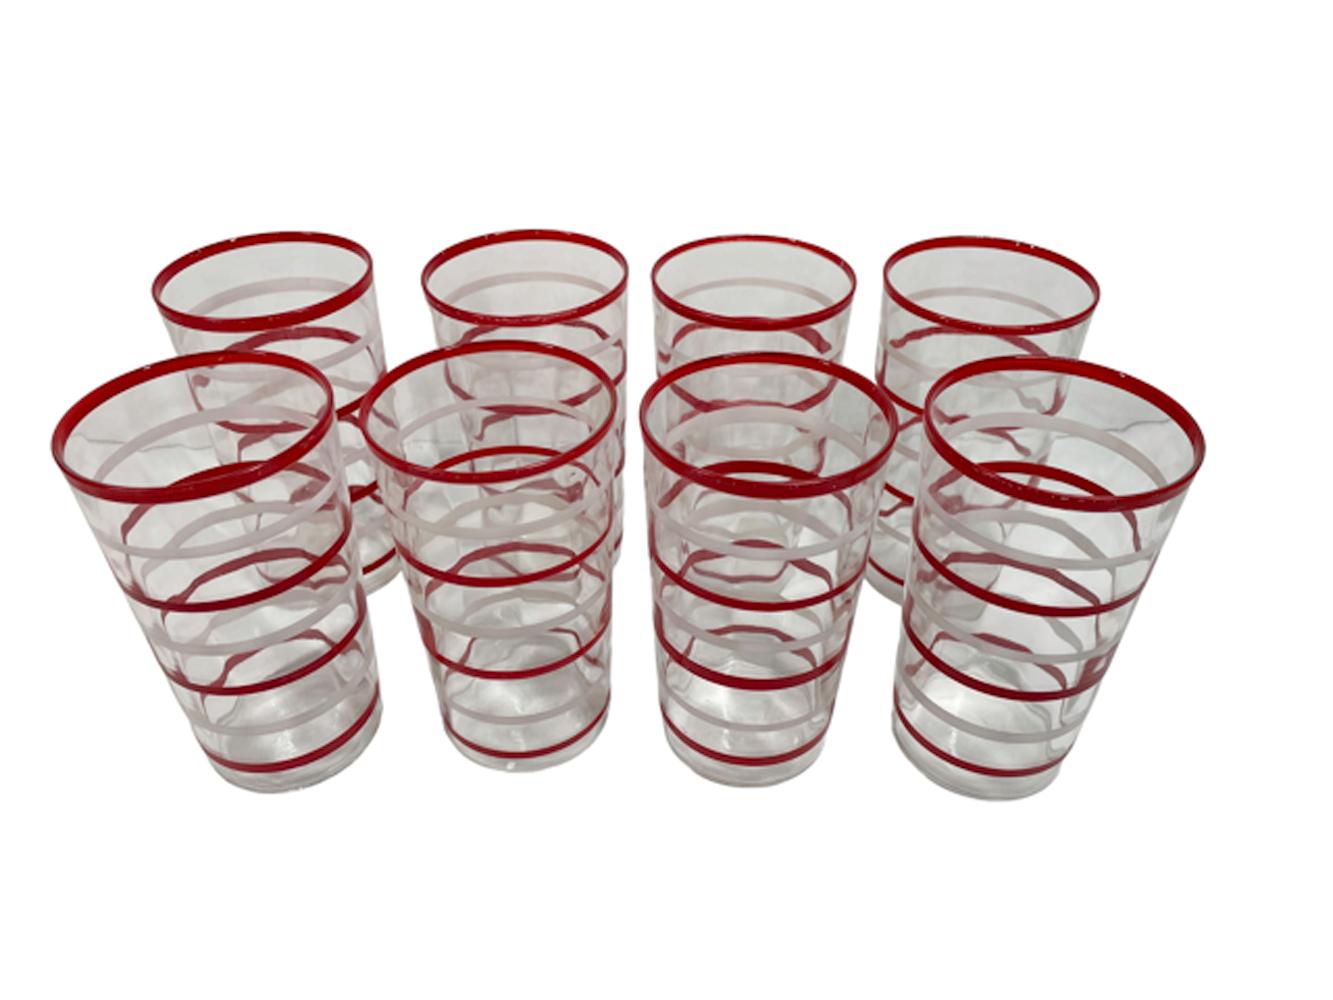 American 15 Piece Hand Painted Art Deco Cocktail Shaker Set with Red and White Bands For Sale